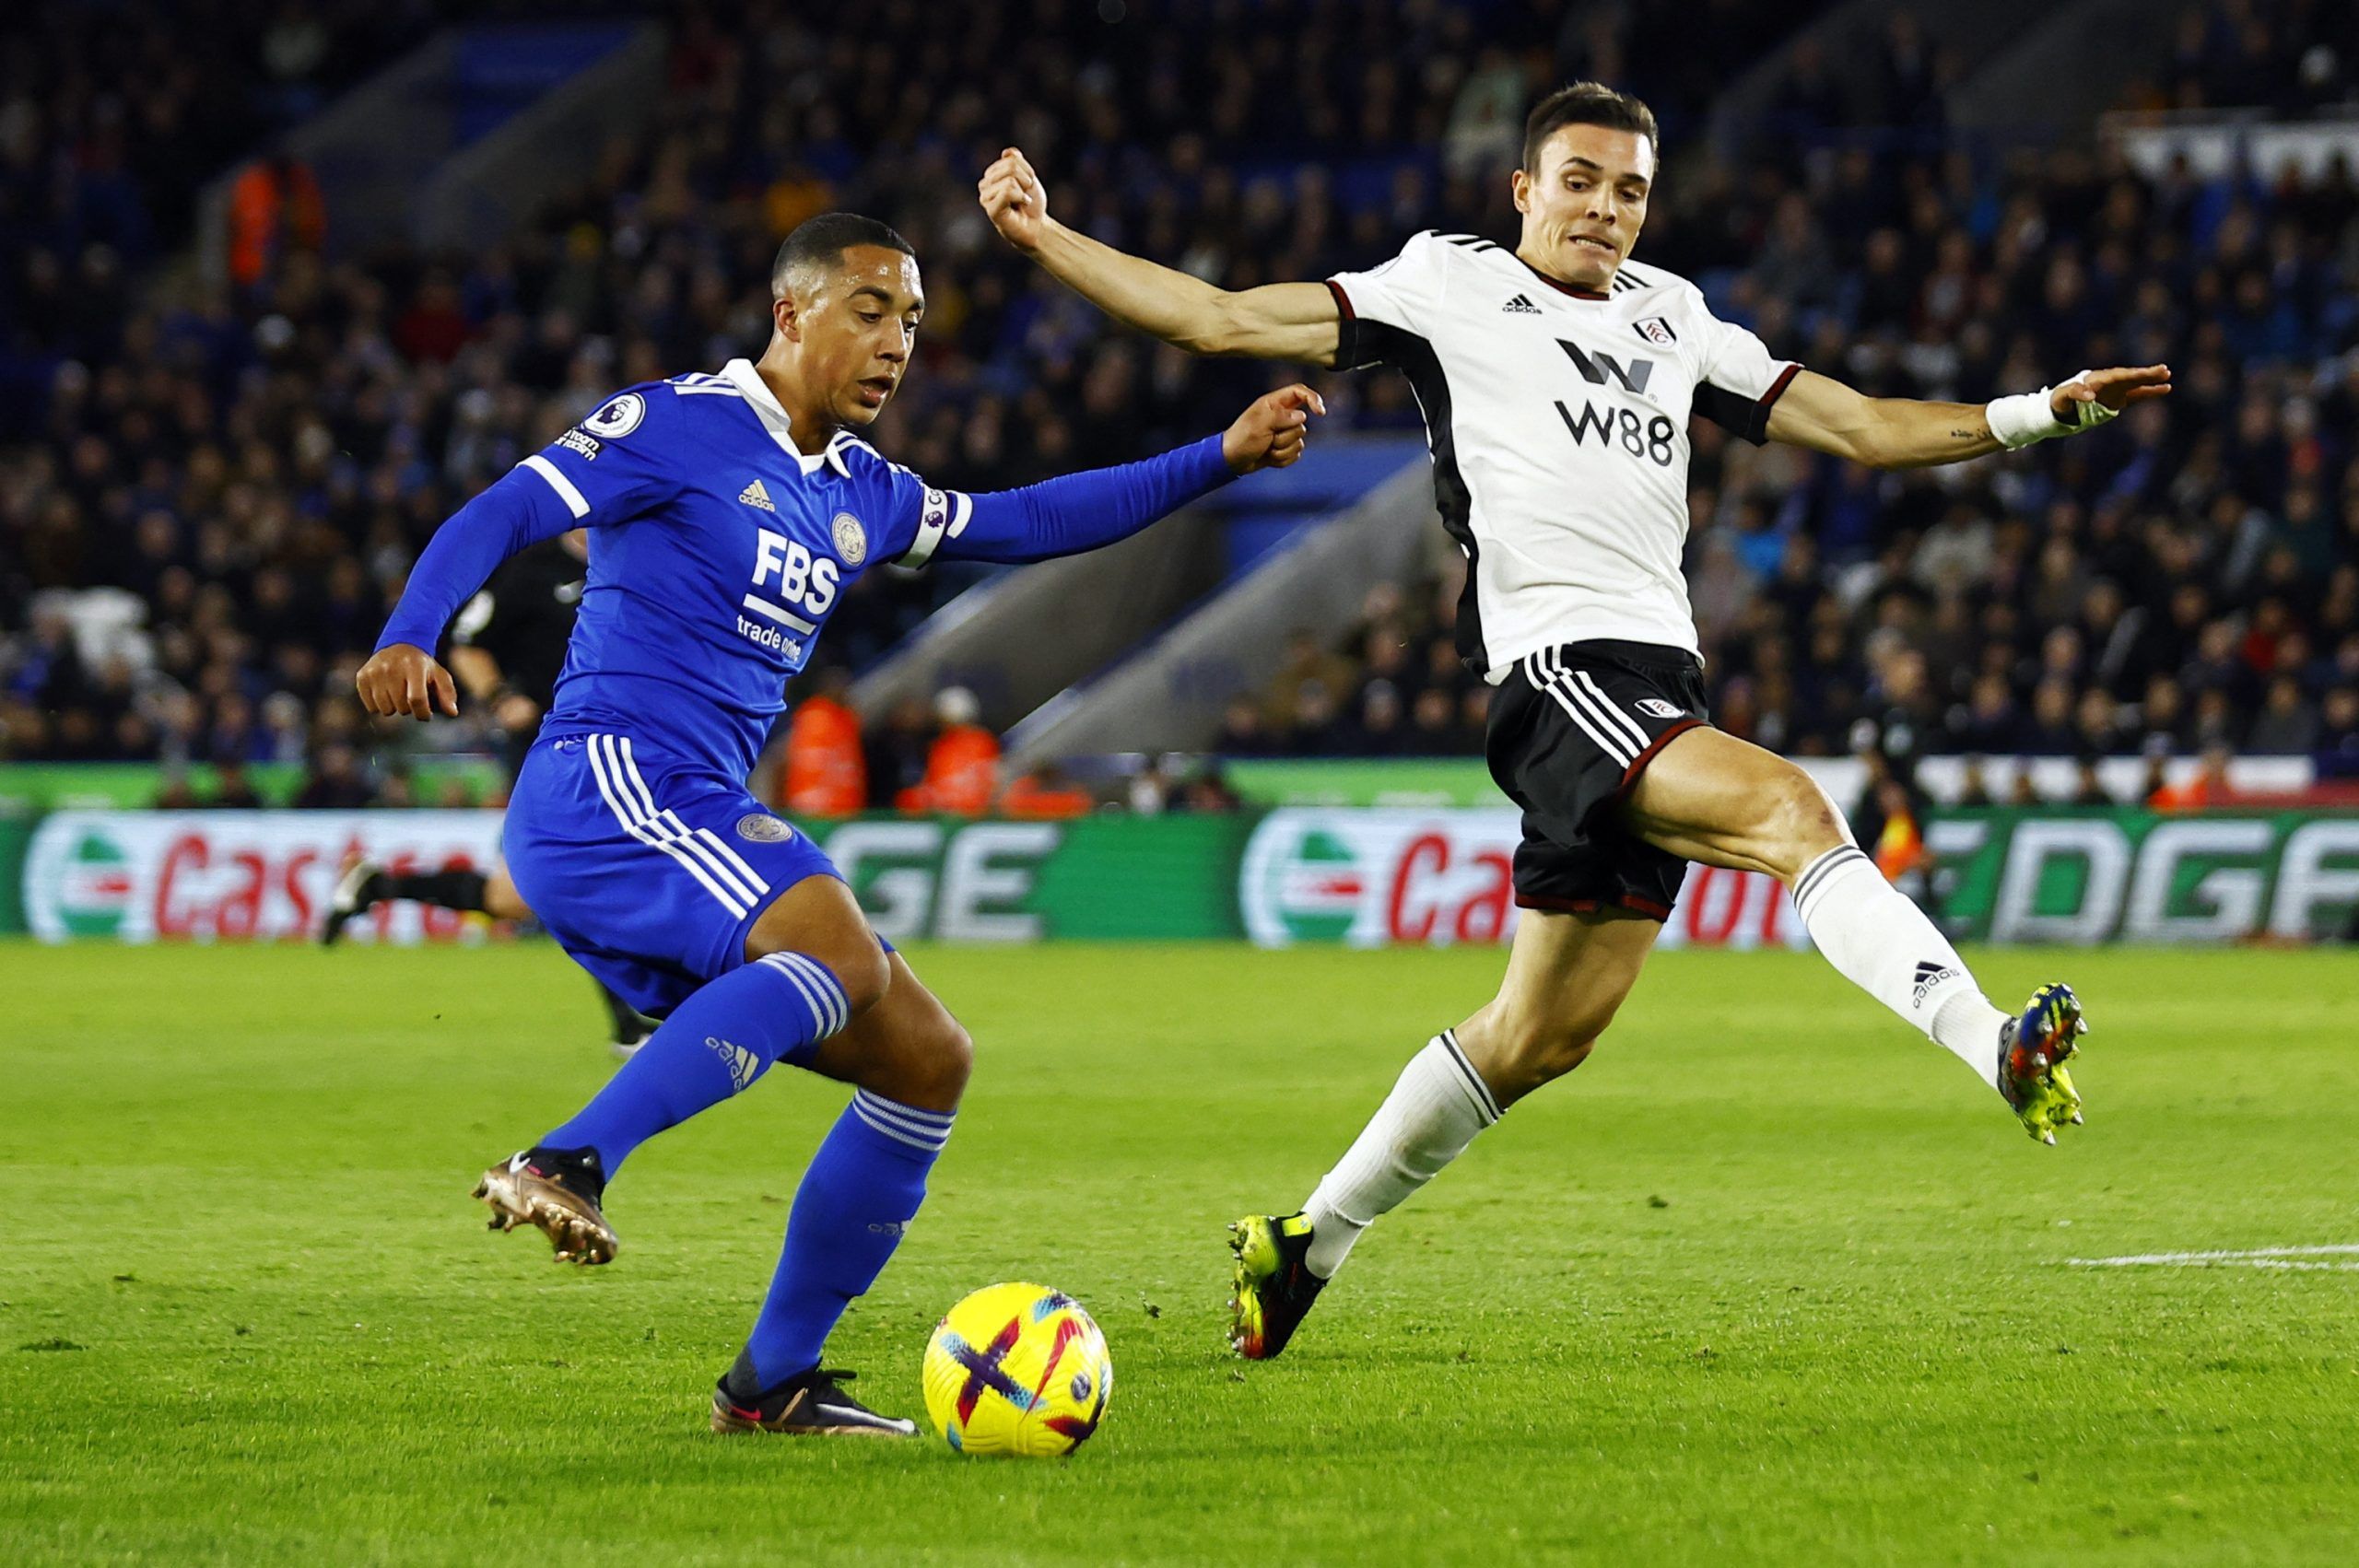 Soccer Football - Premier League - Leicester City v Fulham - King Power Stadium, Leicester, Britain - January 3, 2023 Leicester City's Youri Tielemans in action with Fulham's Joao Palhinha Action Images via Reuters/Andrew Boyers EDITORIAL USE ONLY. No use with unauthorized audio, video, data, fixture lists, club/league logos or 'live' services. Online in-match use limited to 75 images, no video emulation. No use in betting, games or single club /league/player publications.  Please contact your a